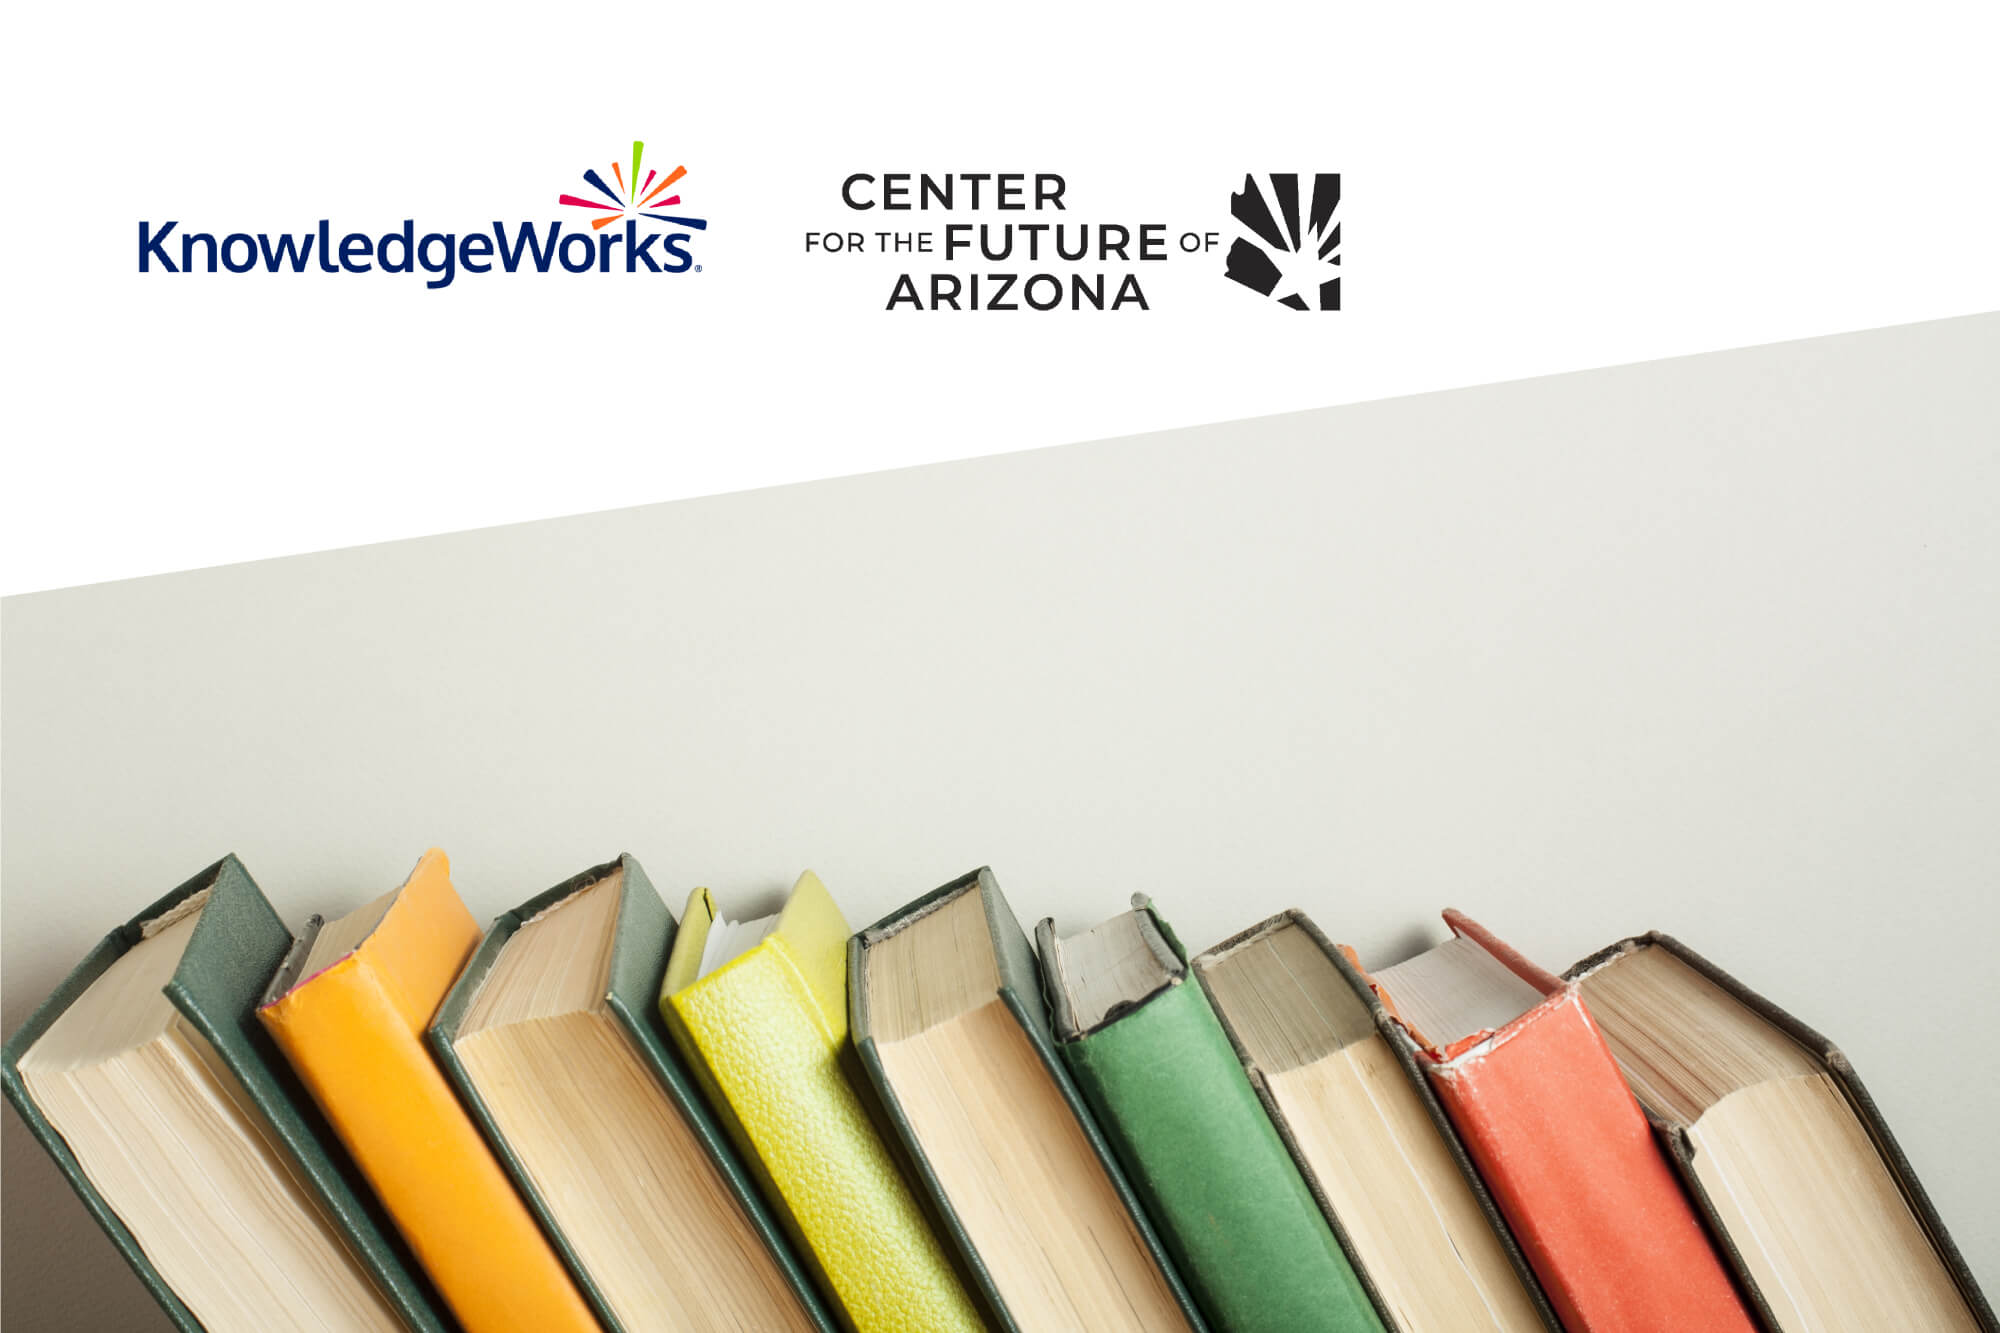 Books on table with KnowledgeWorks and Center for the Future of Arizona logos